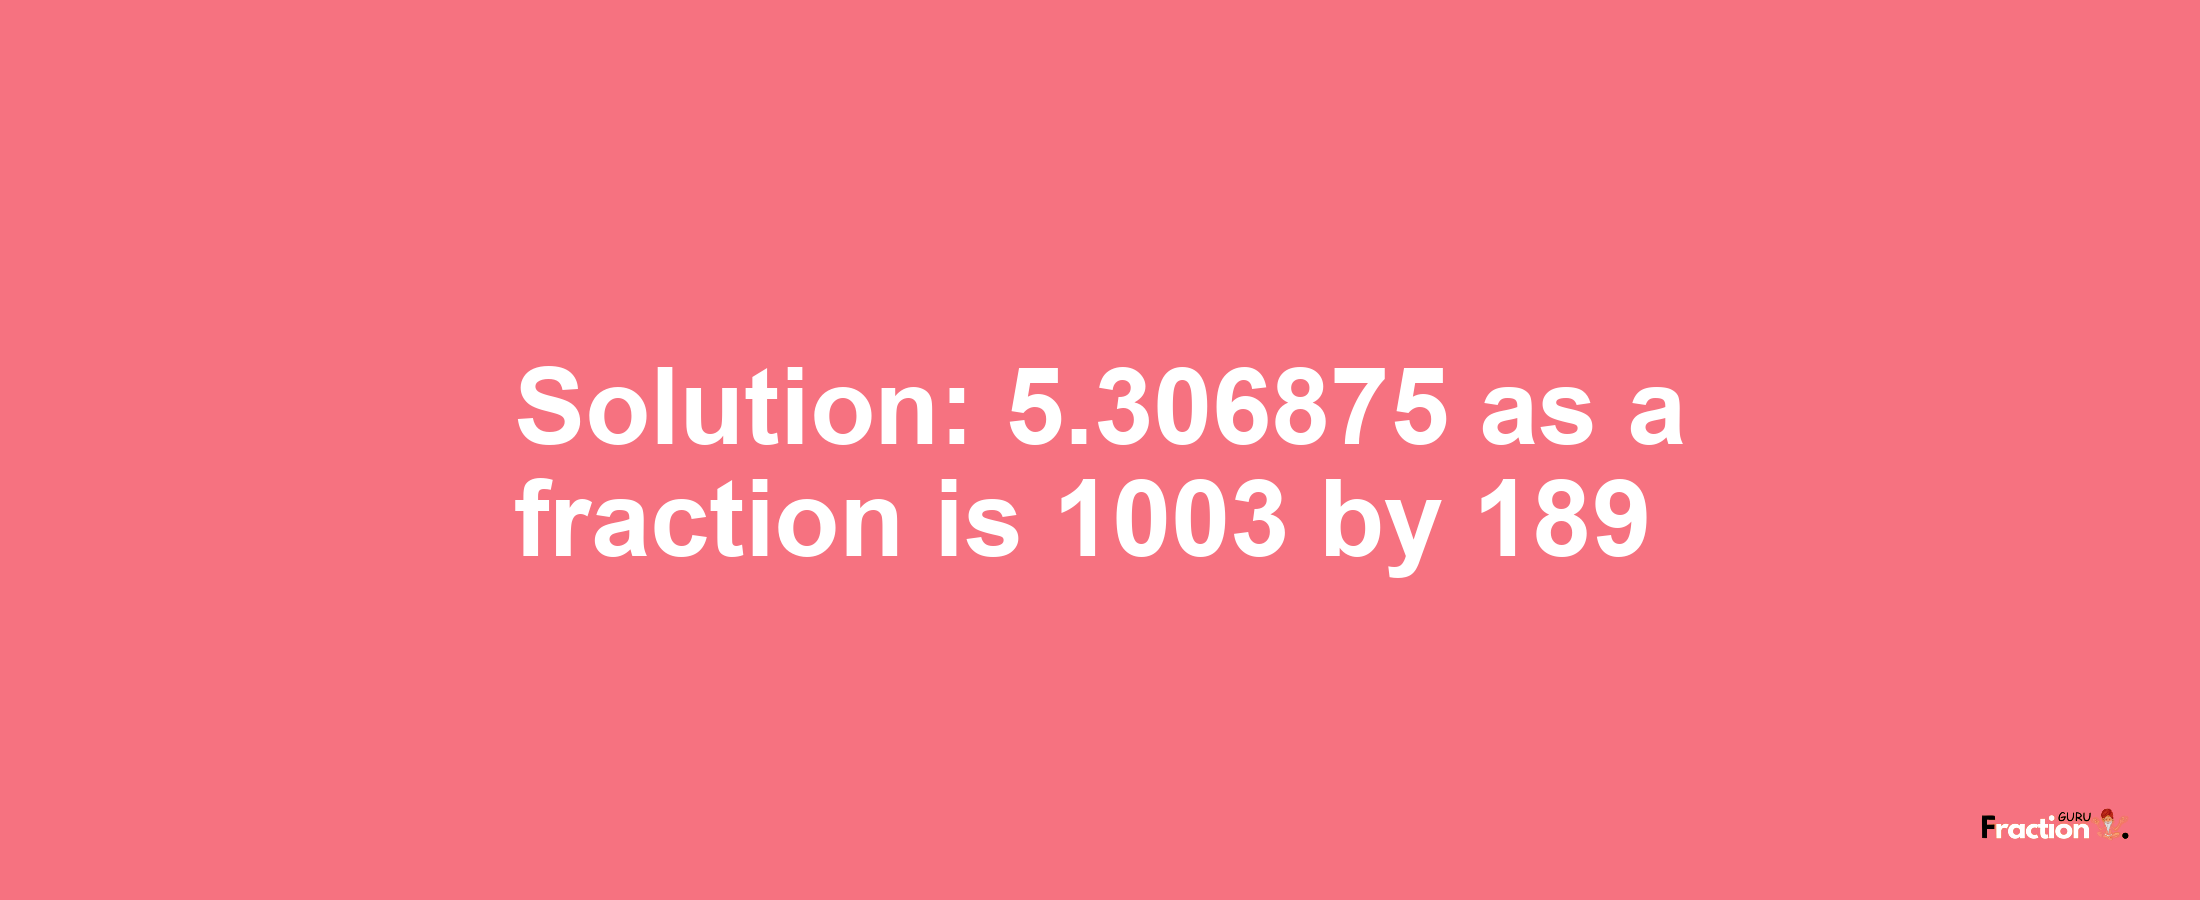 Solution:5.306875 as a fraction is 1003/189